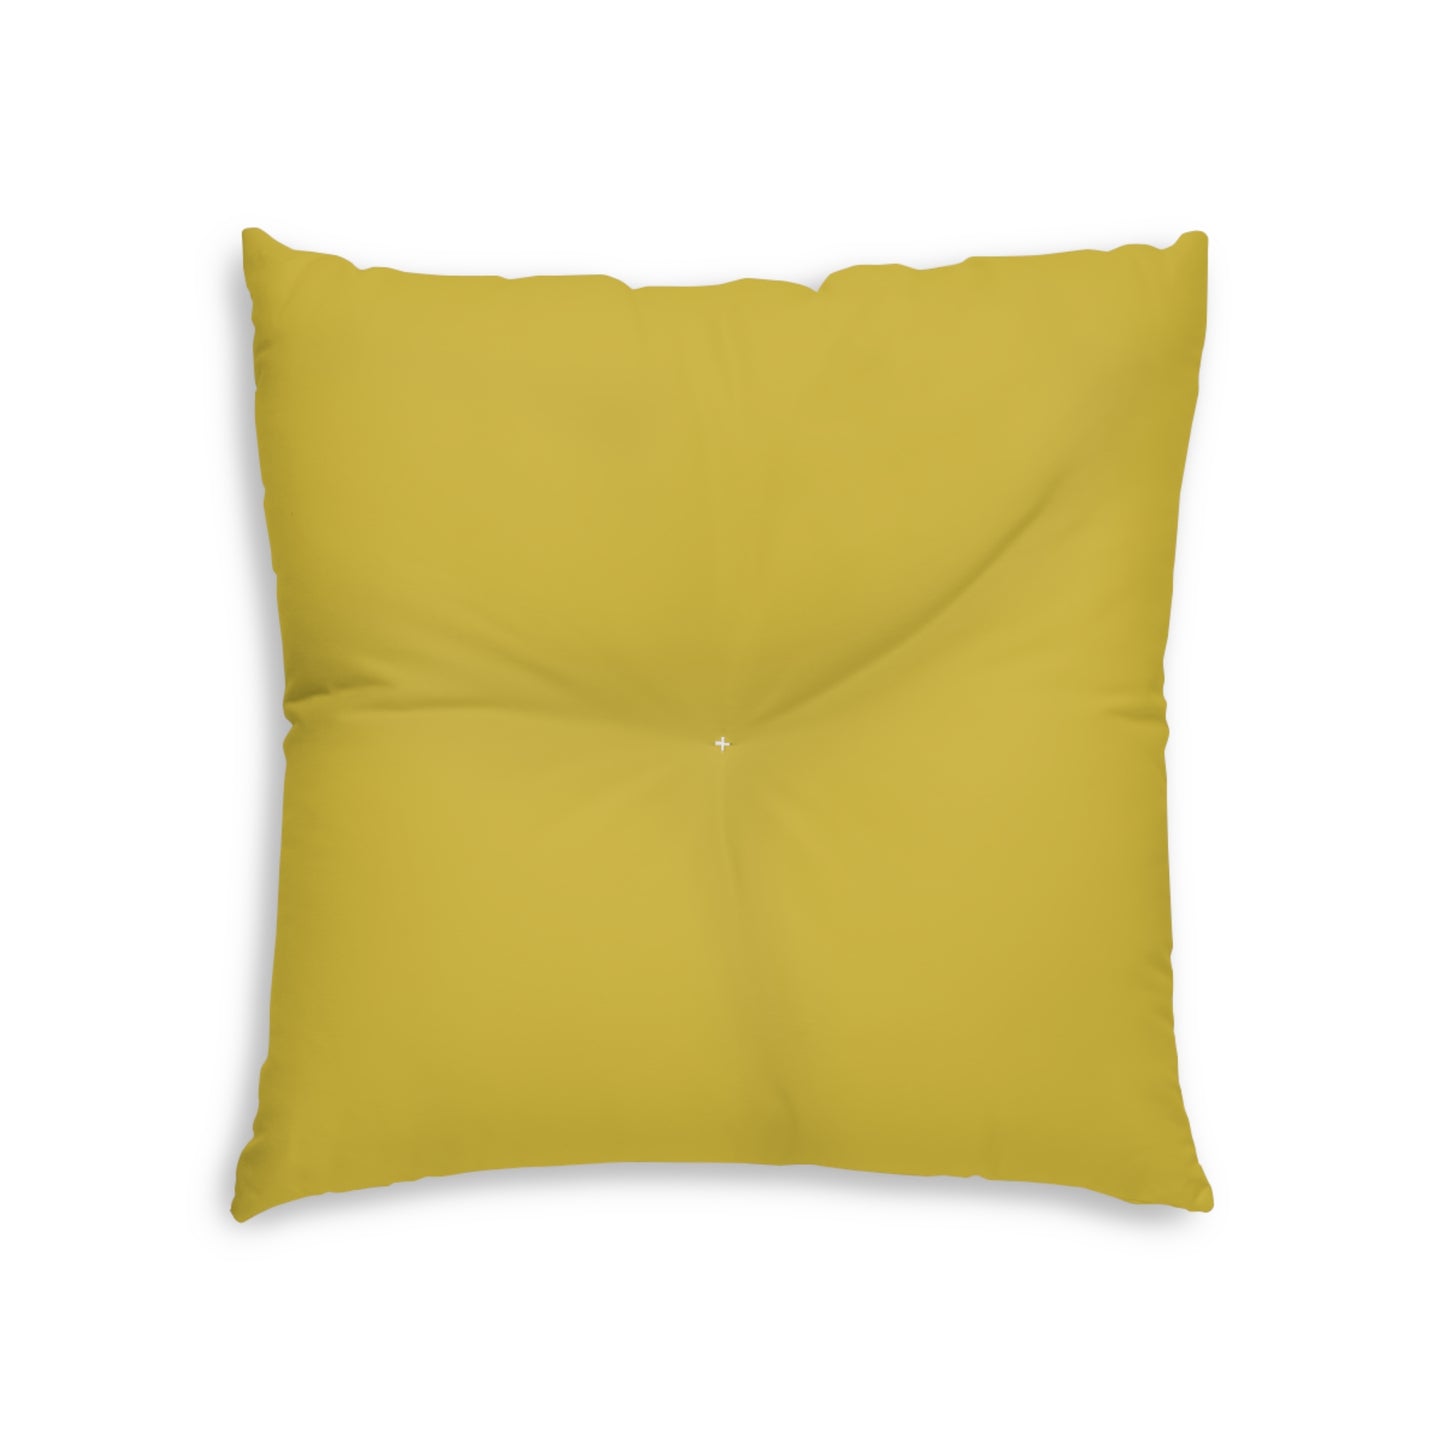 Golden Yellow Tufted  Square Floor Pillow with Star Illustration